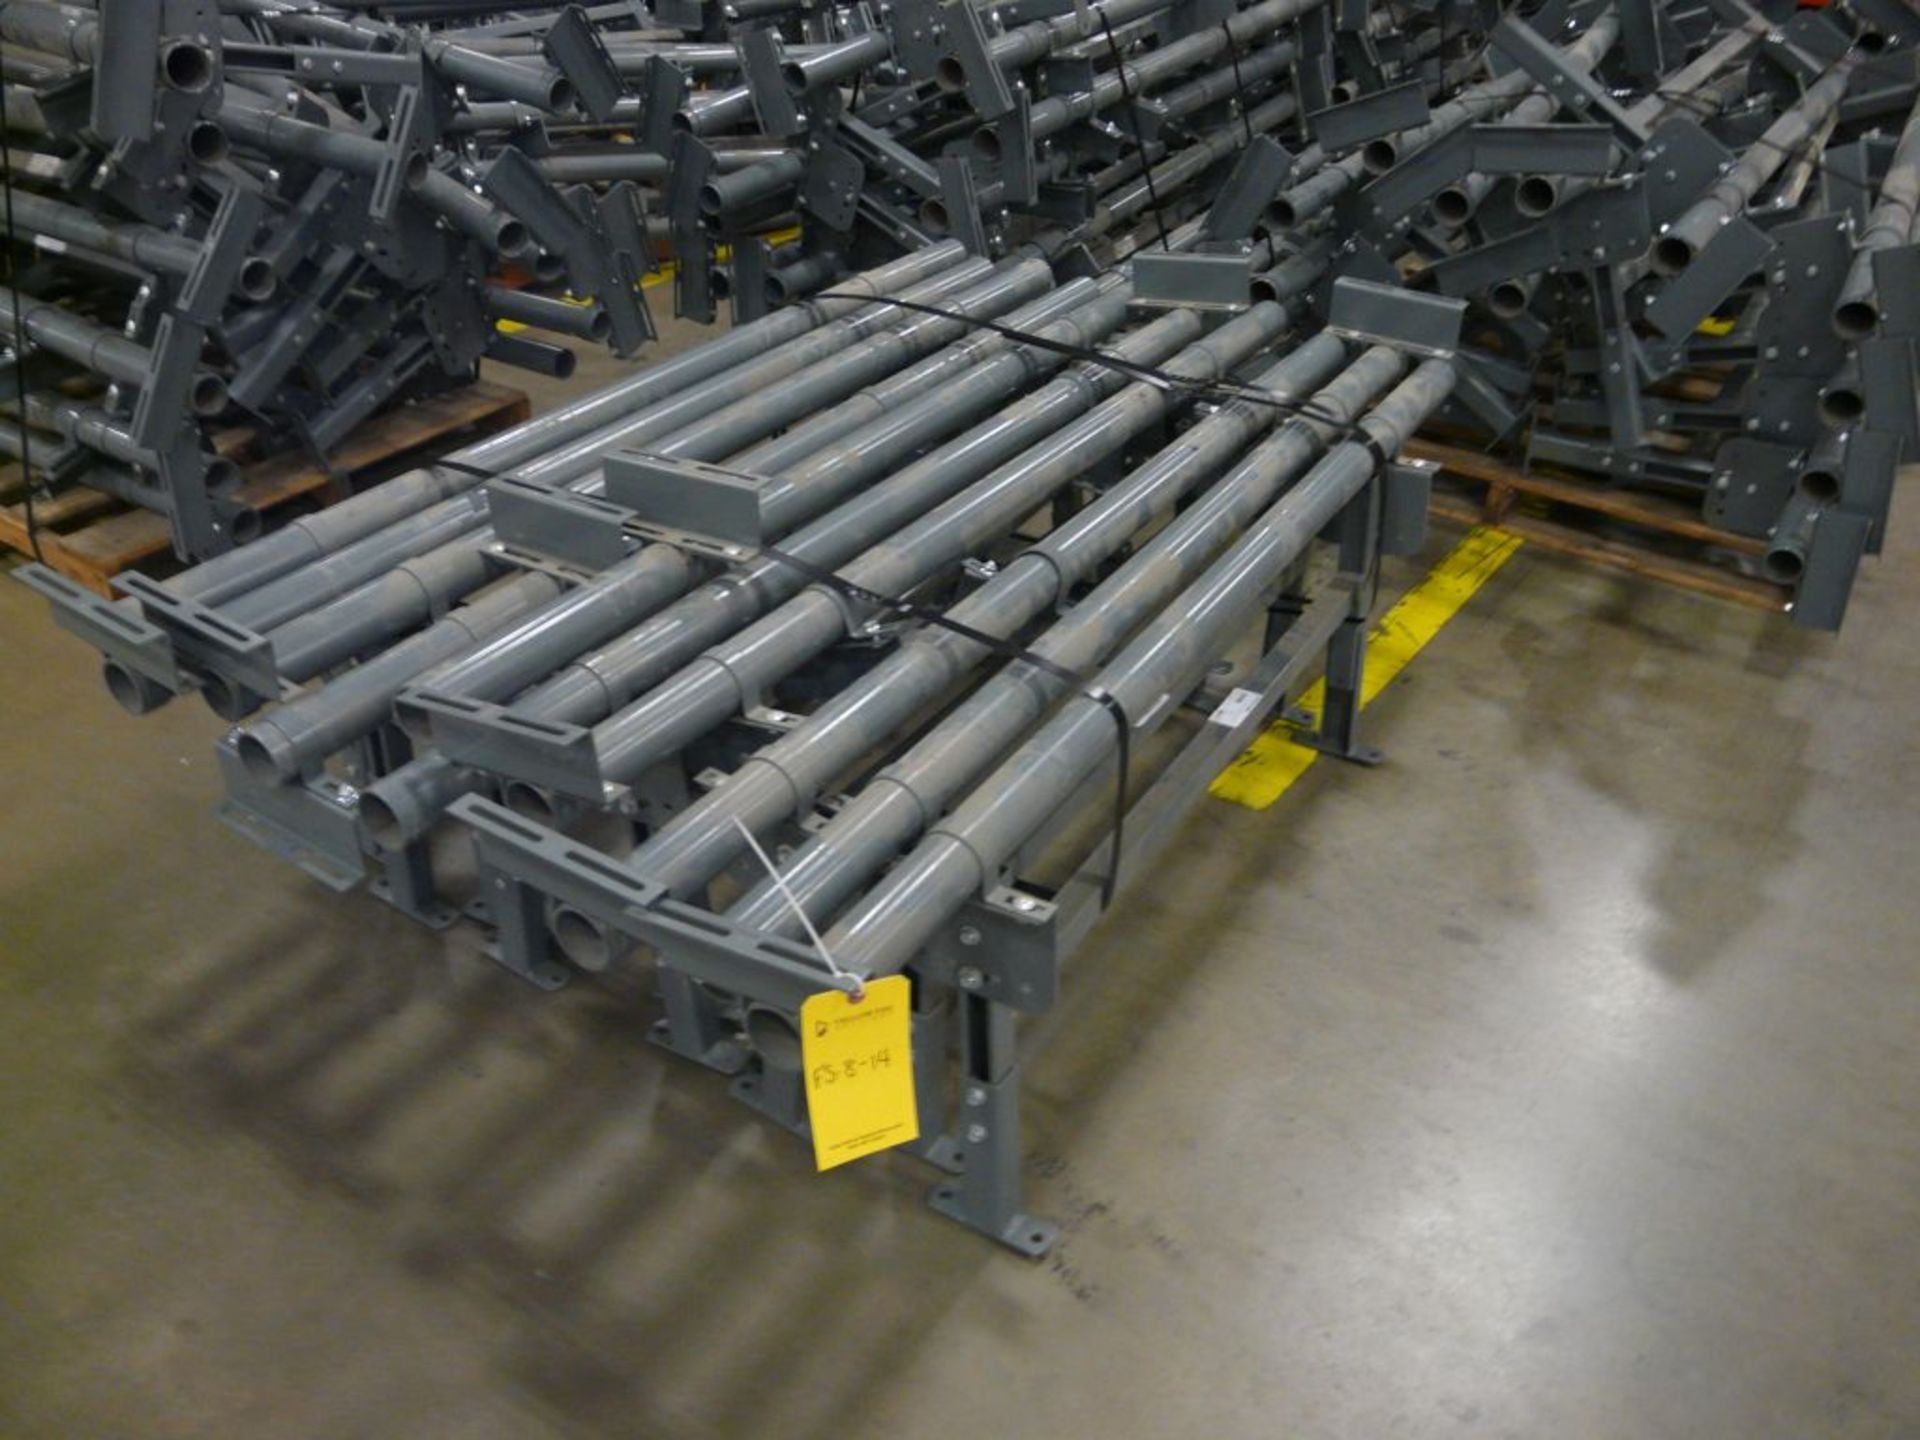 Lot of (10) USA Floor Supports - Brace: 71"L; Stand: 44"L x 19"H; Tag: 223858 - $30 Lot Loading Fee - Image 2 of 4